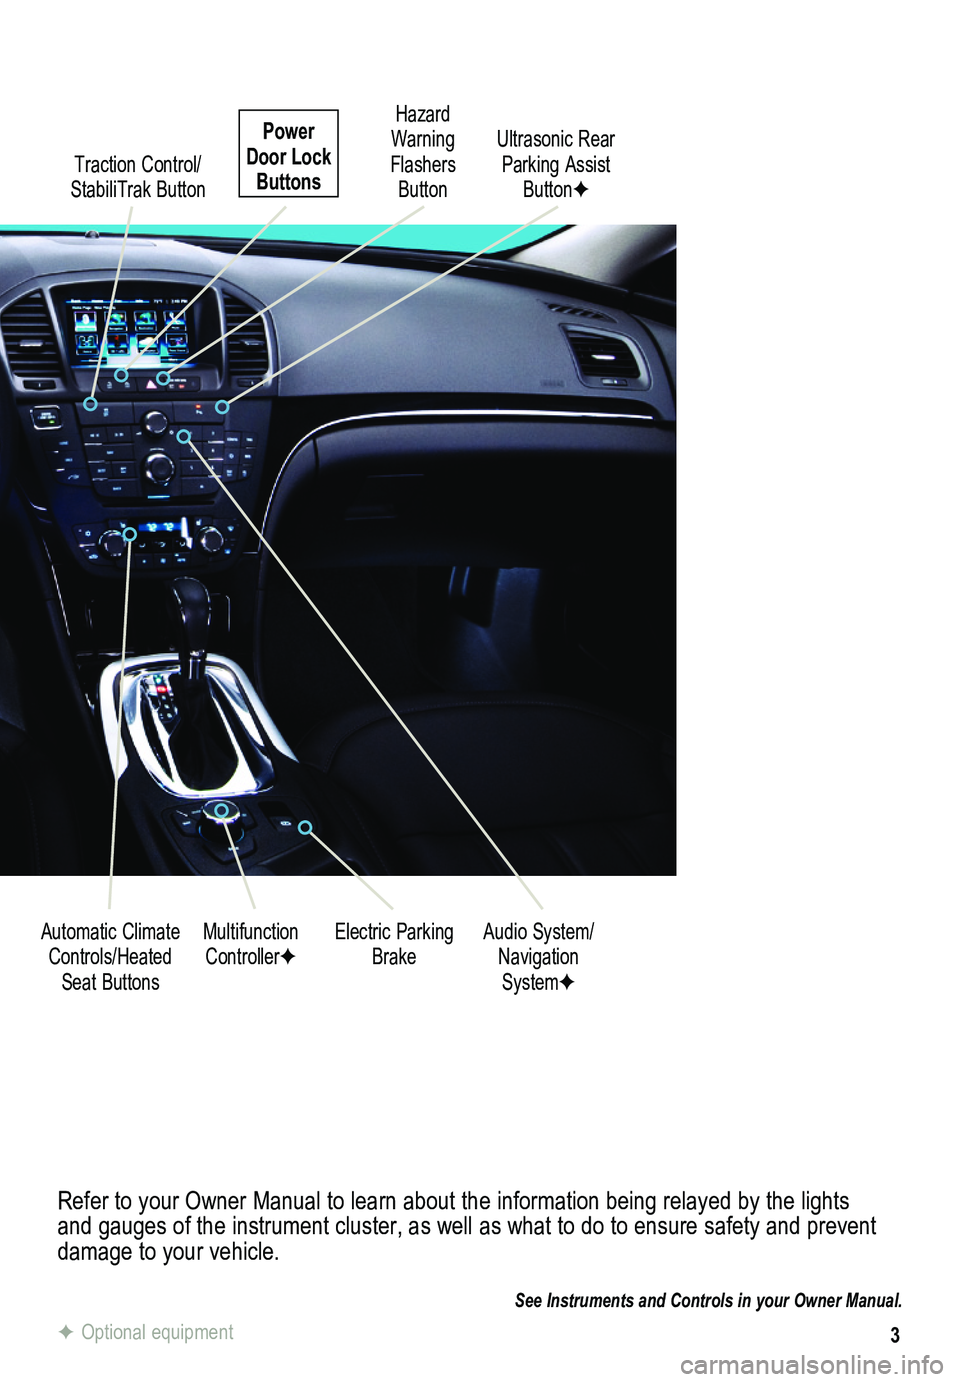 BUICK REGAL 2013  Get To Know Guide 3
Refer to your Owner Manual to learn about the information being relayed \
by the lights and gauges of the instrument cluster, as well as what to do to ensure safety\
 and prevent damage to your vehi